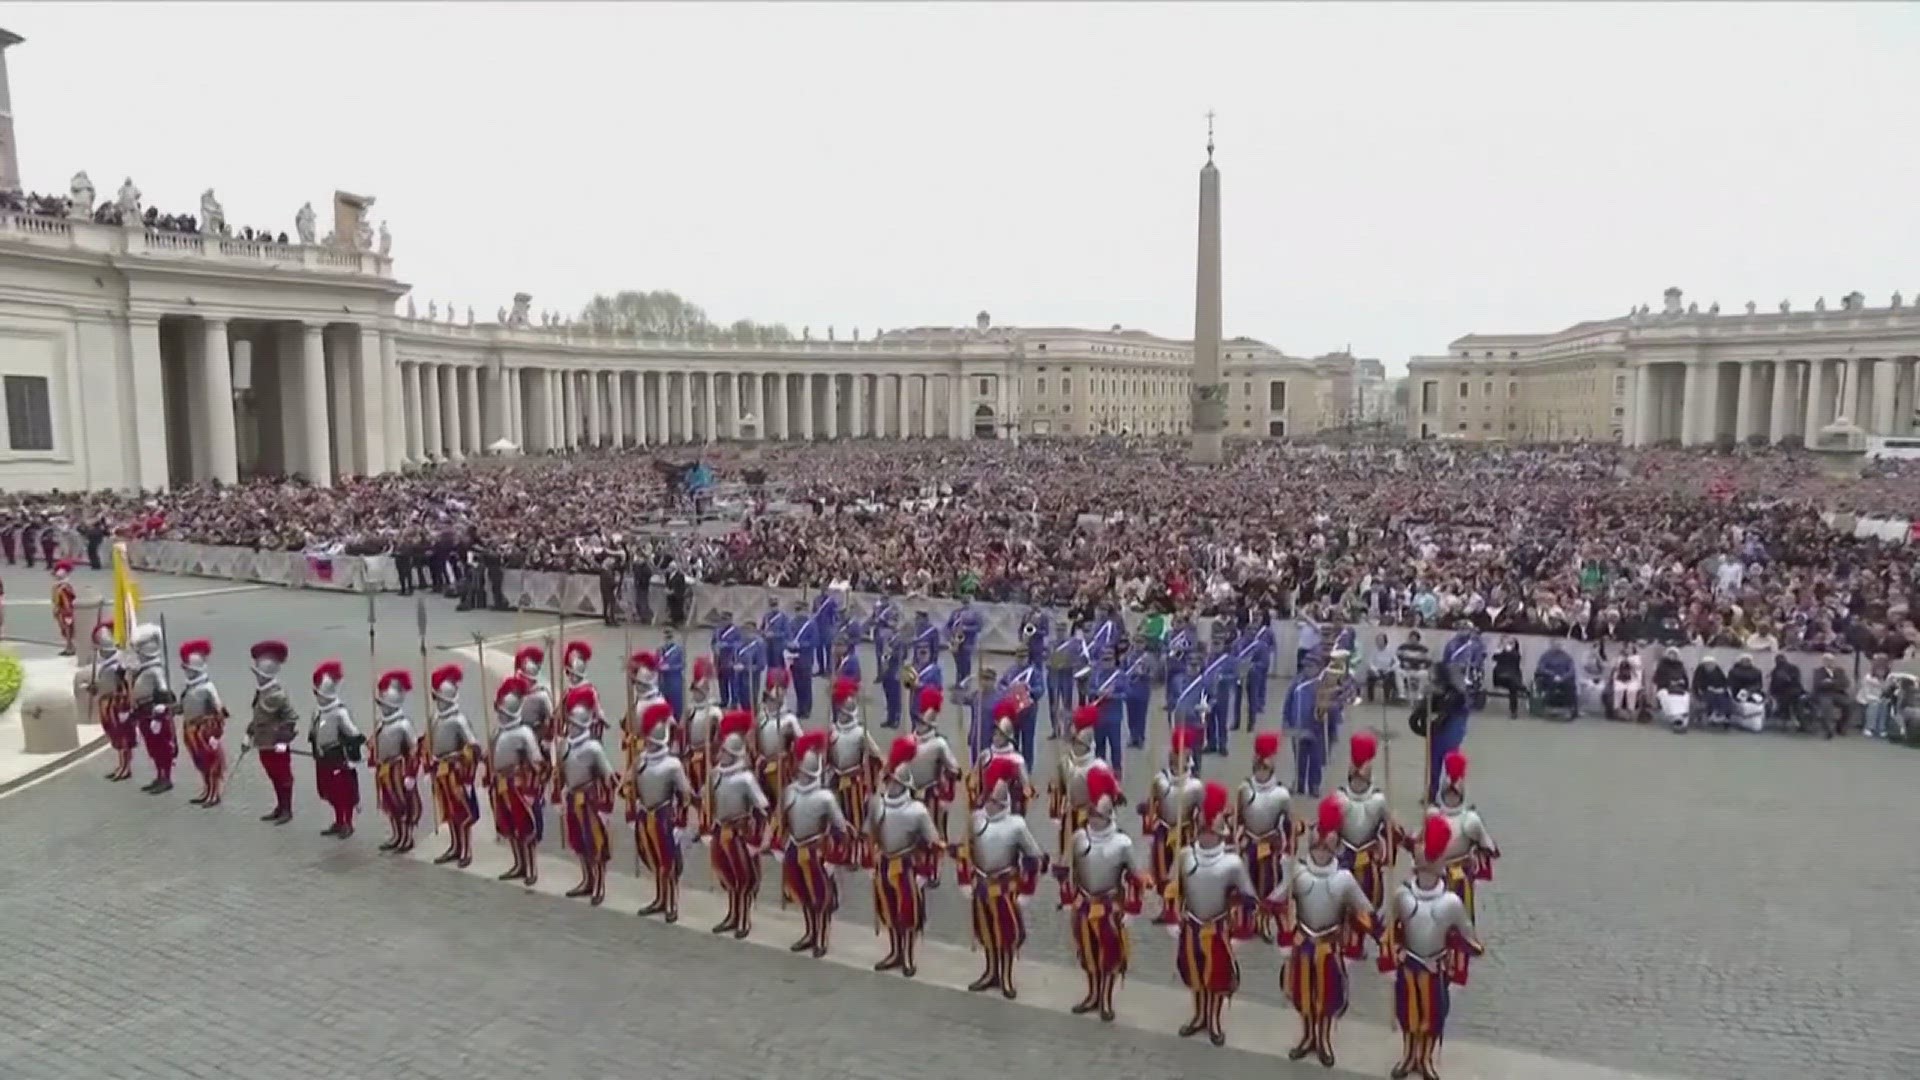 tens of thousands of worshipers gathered in Saint Peter Square from all over the world to celebrate the holiday.